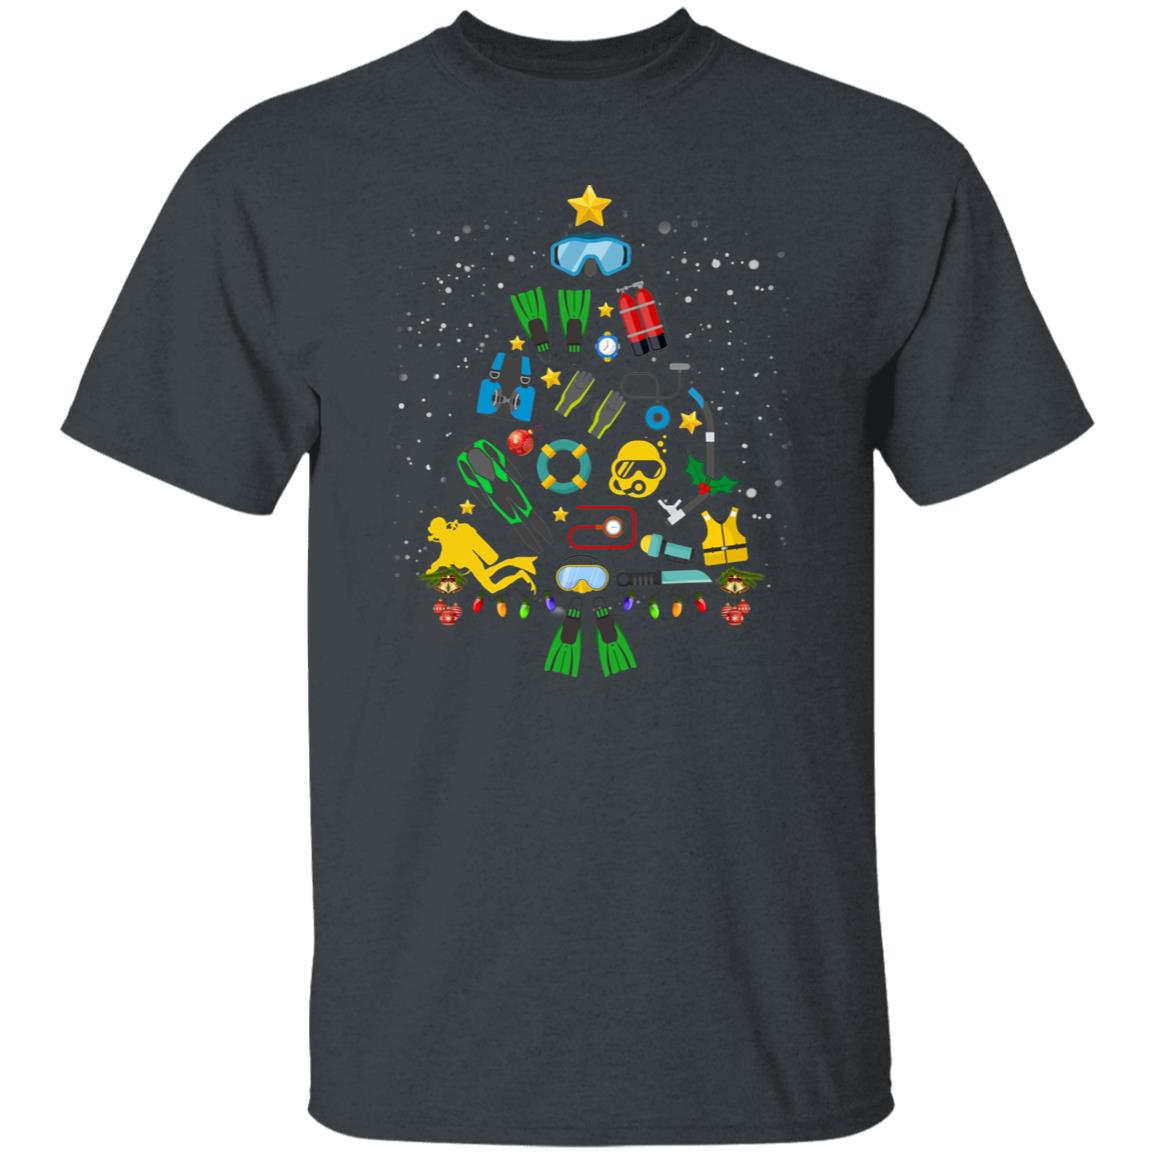 Diver Christmas tree Unisex shirt diving Holiday tee Black Dark Heather-Family-Gift-Planet